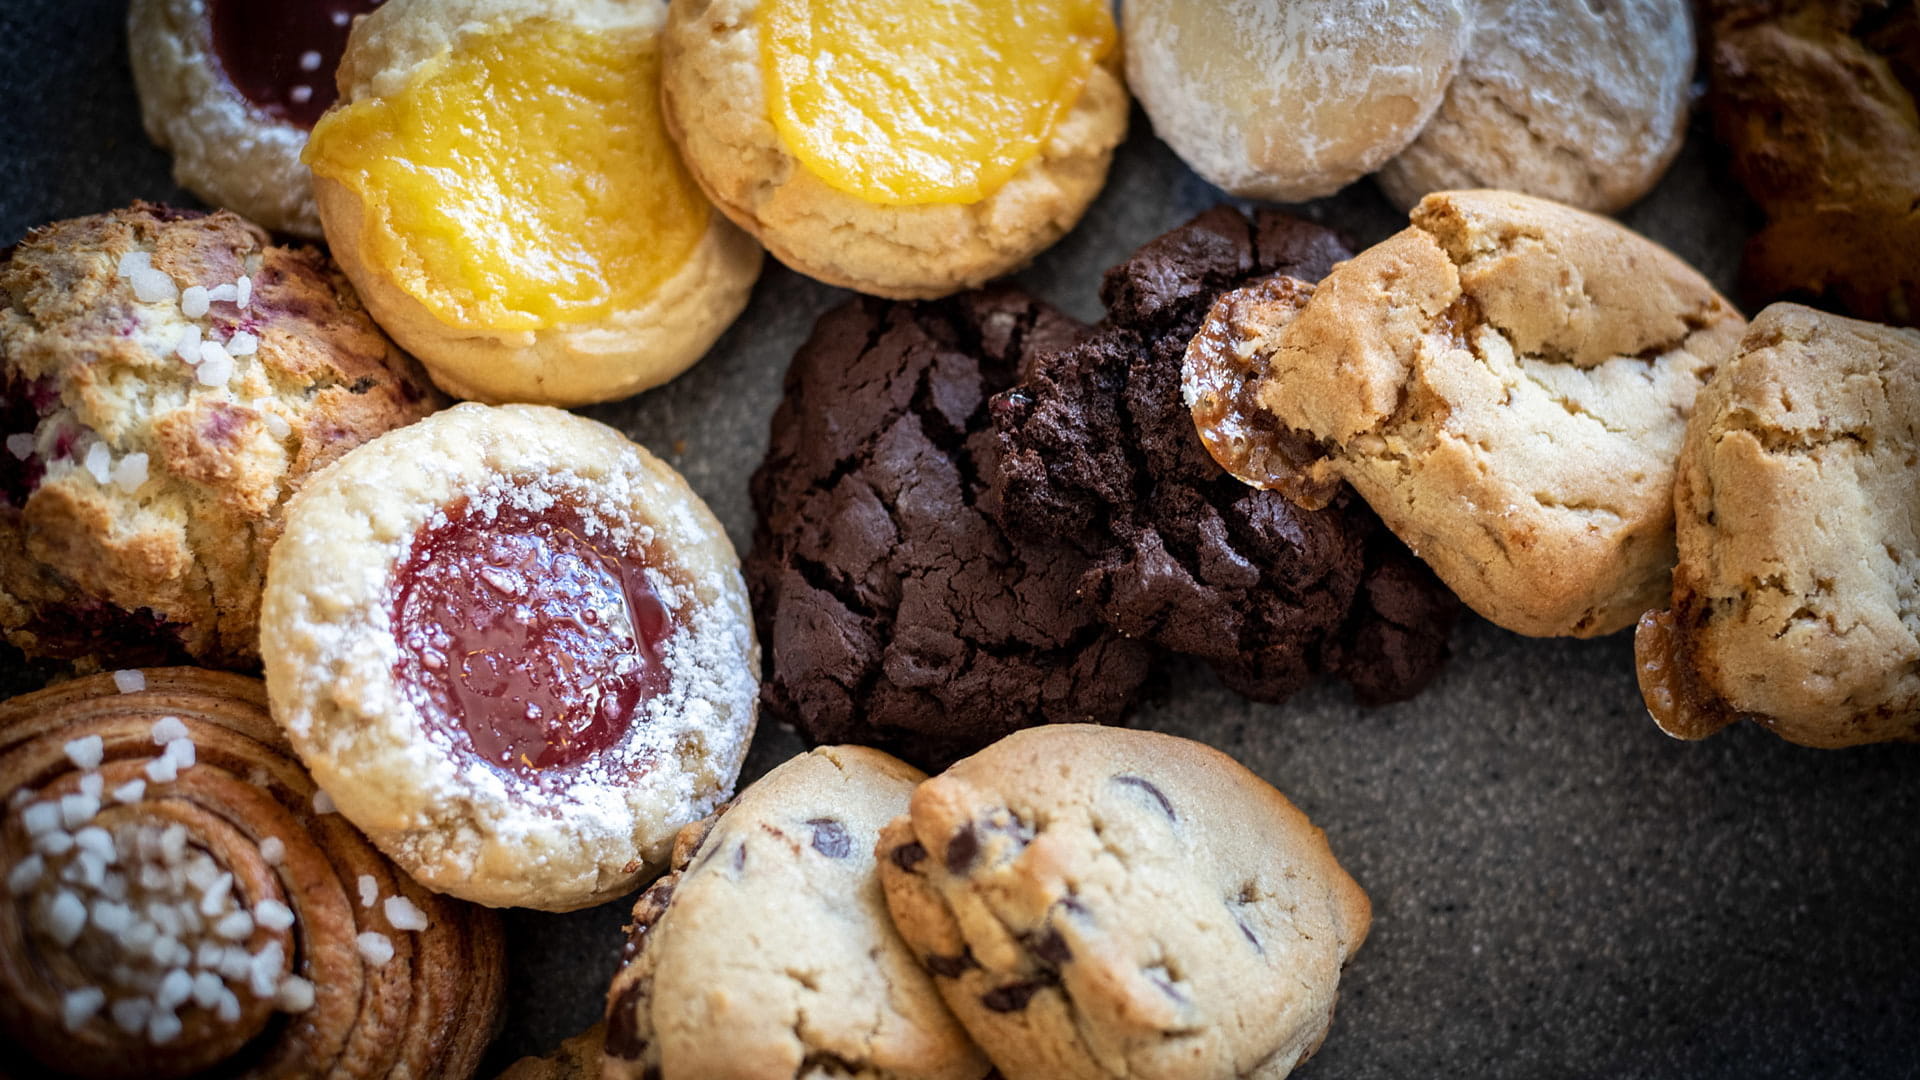 Assortment of fresh-baked cookies and baked goods from Wildflour Baking Co. in The Village at Palisades Tahoe